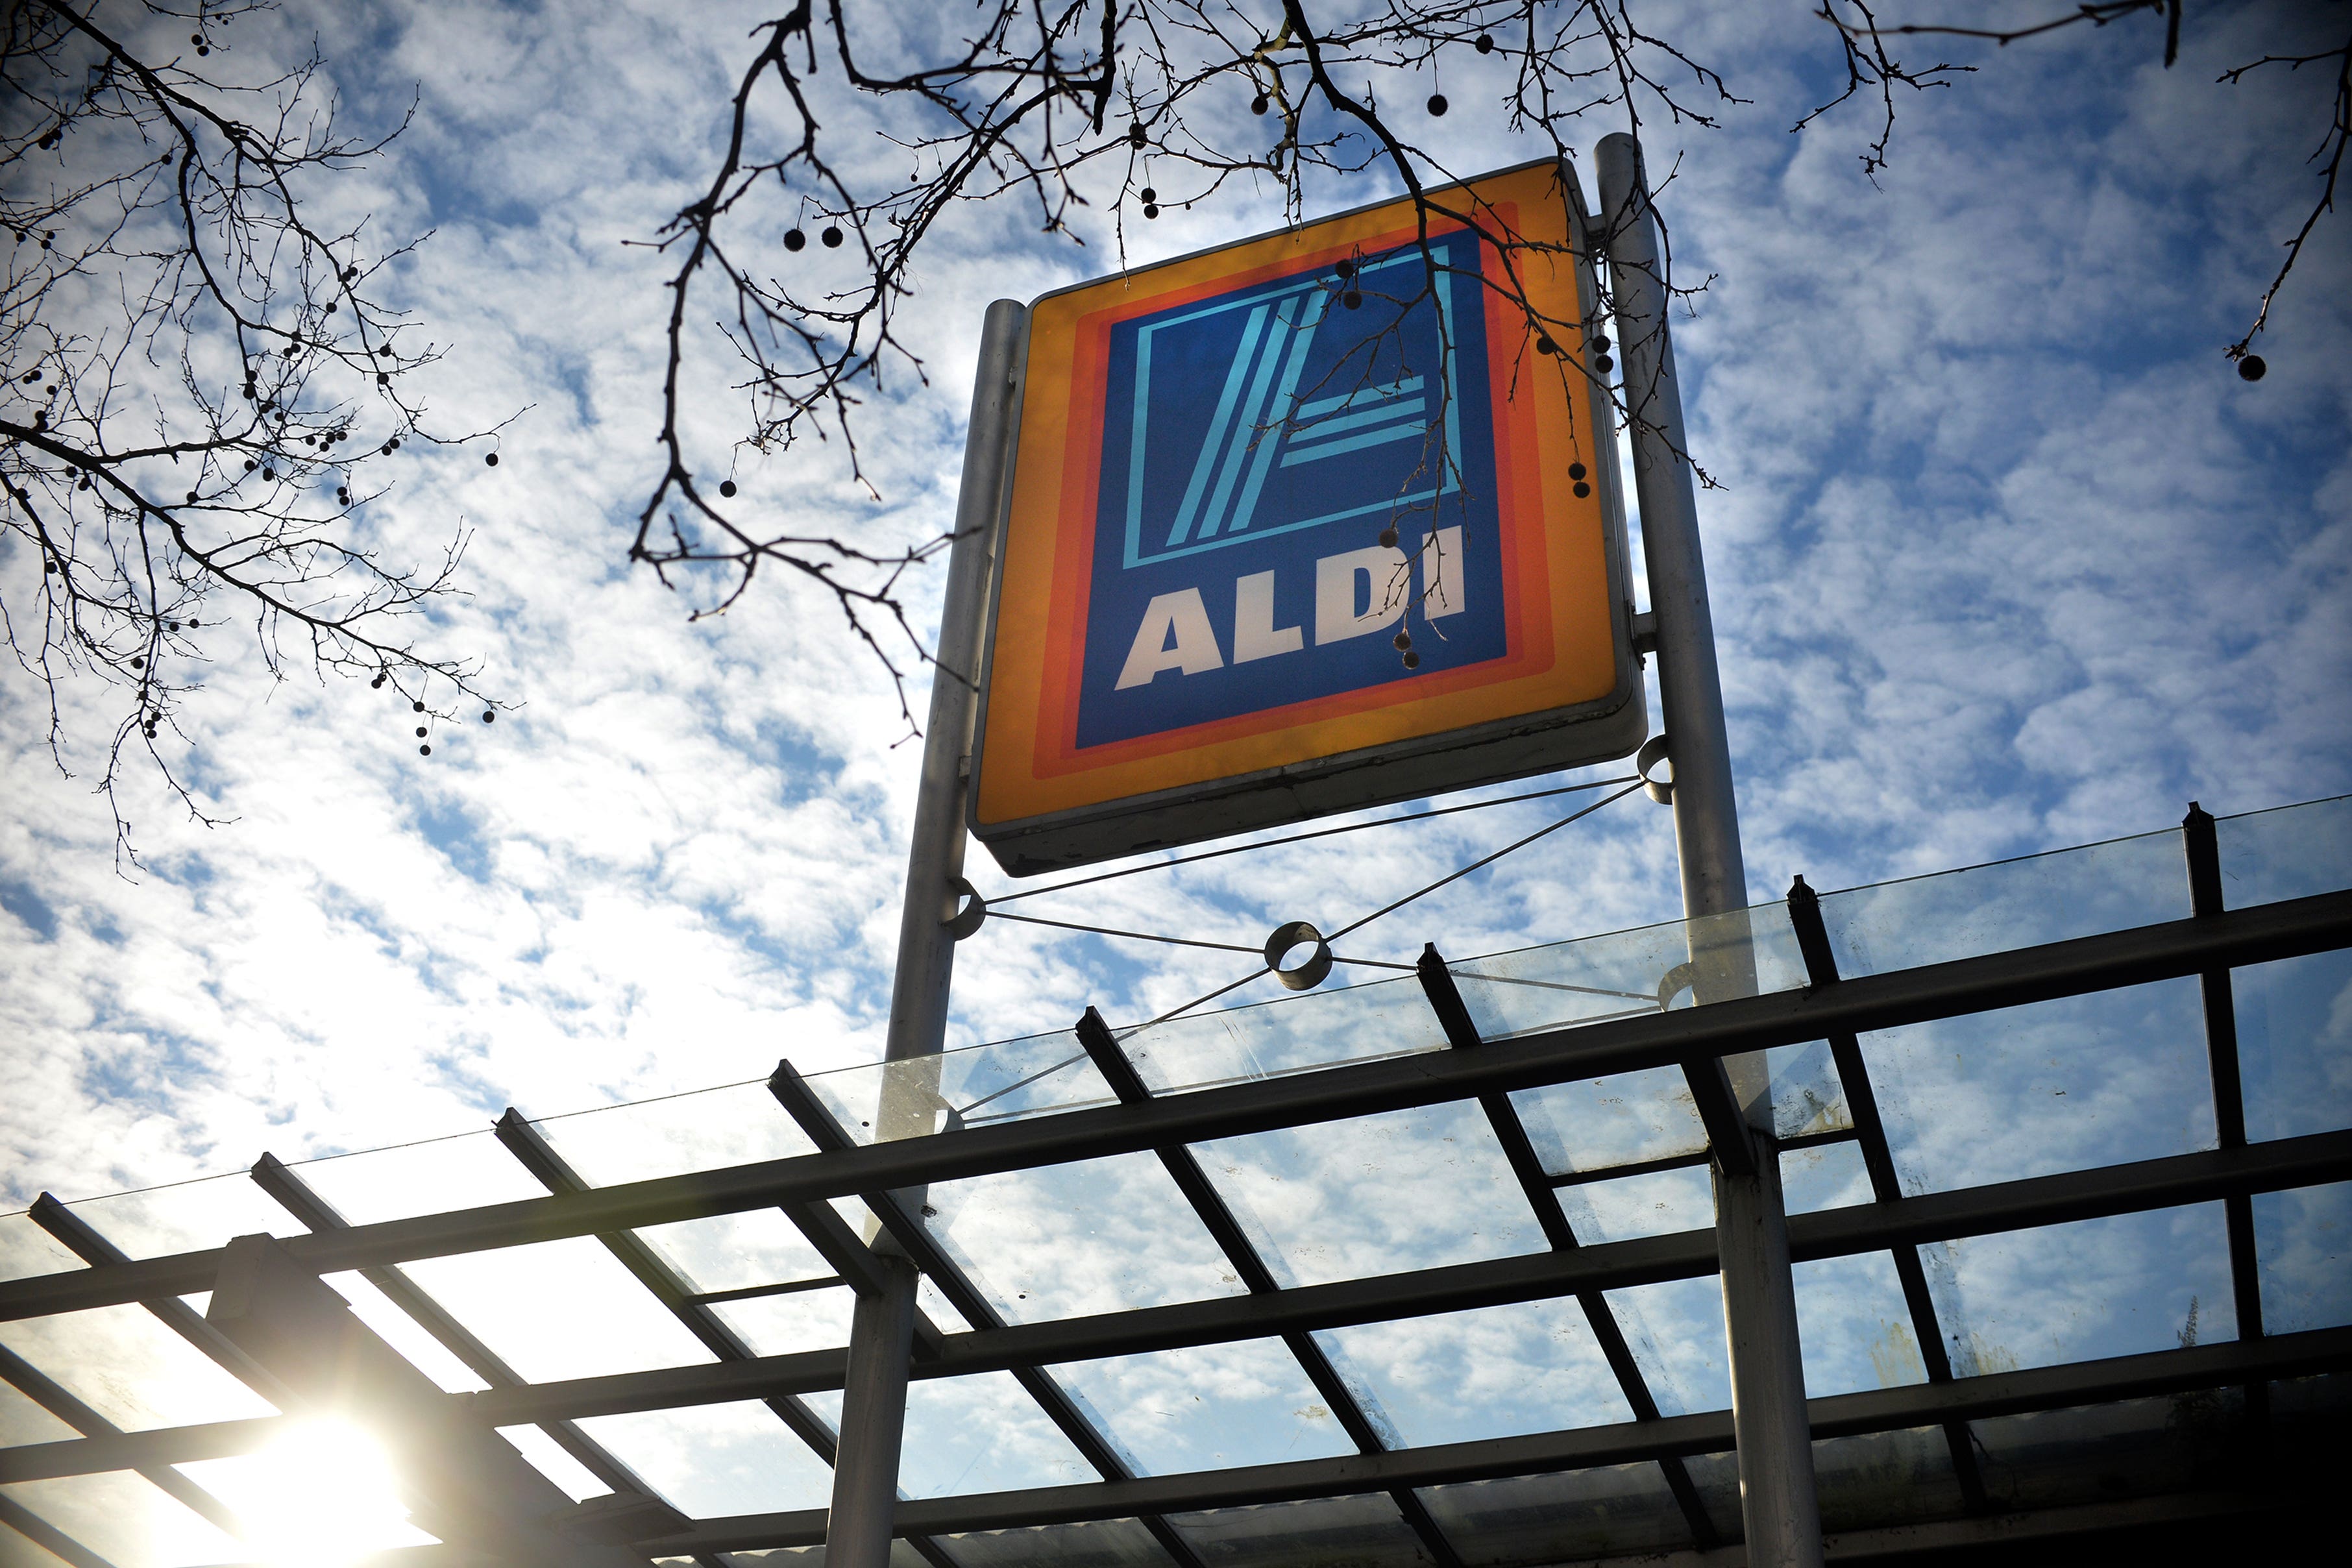 Aldi want to open across the whole country